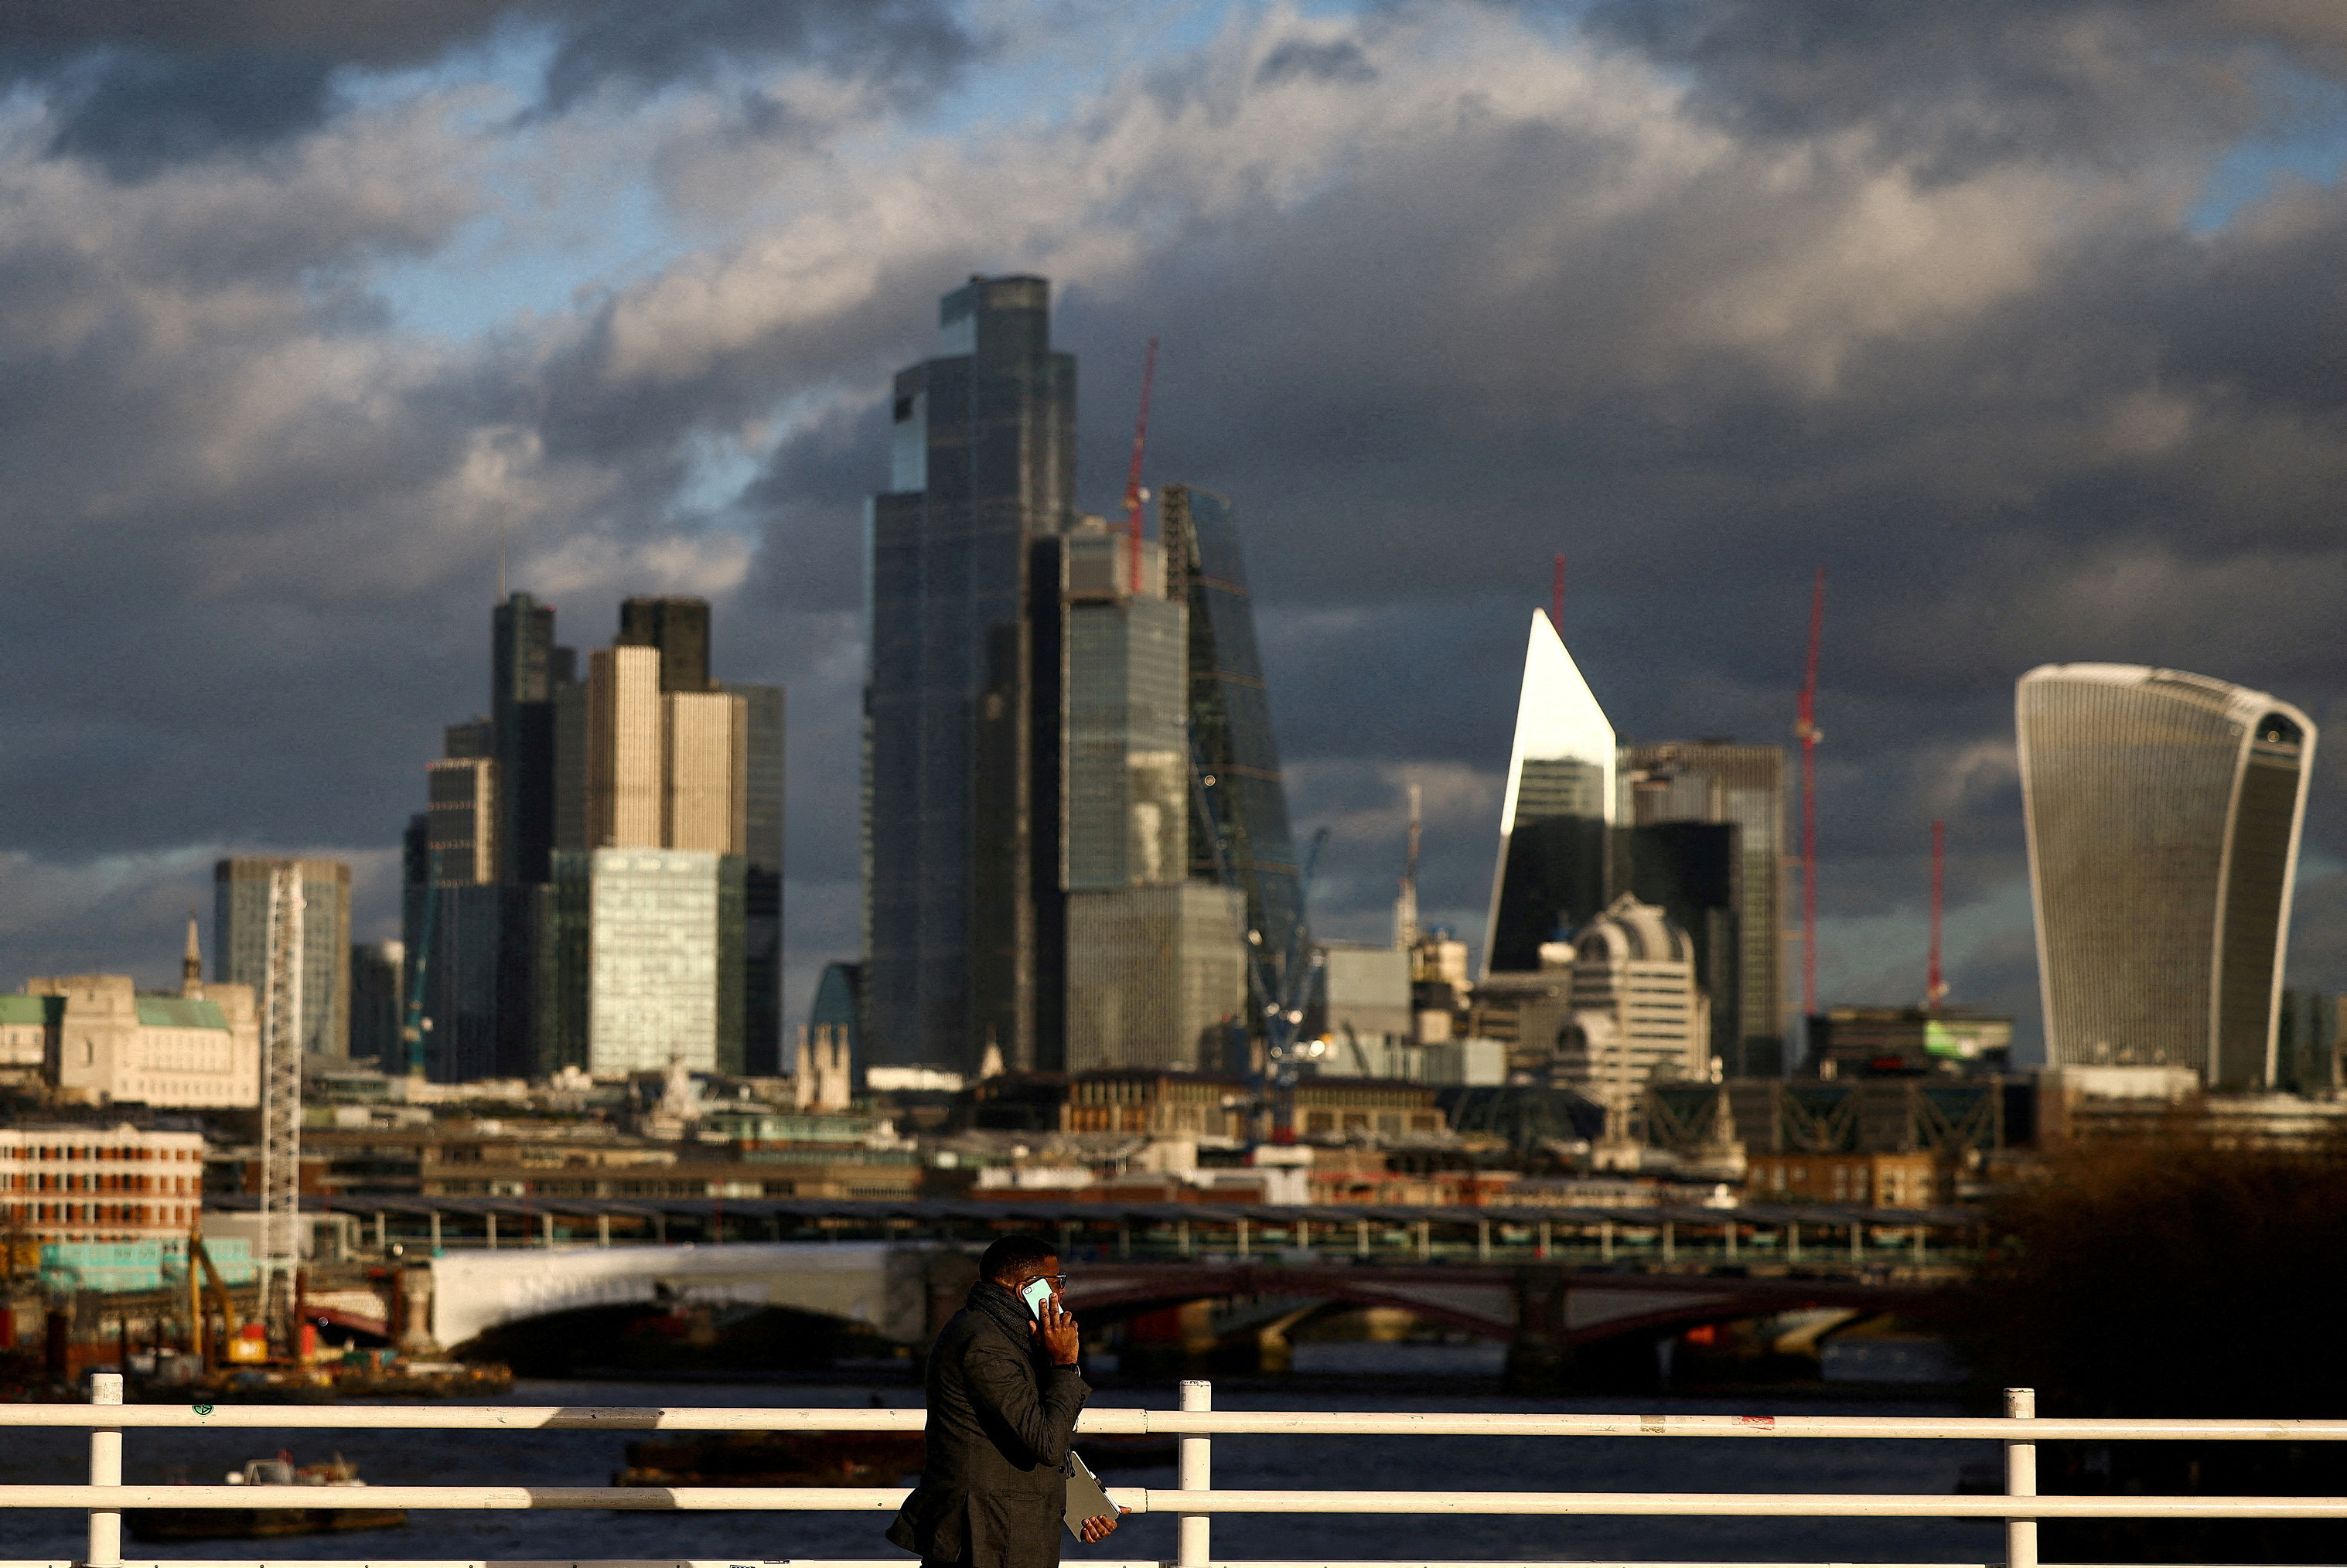 kFILE PHOTO: A person walks across Waterloo Bridge with the City of London financial district in the background, in London